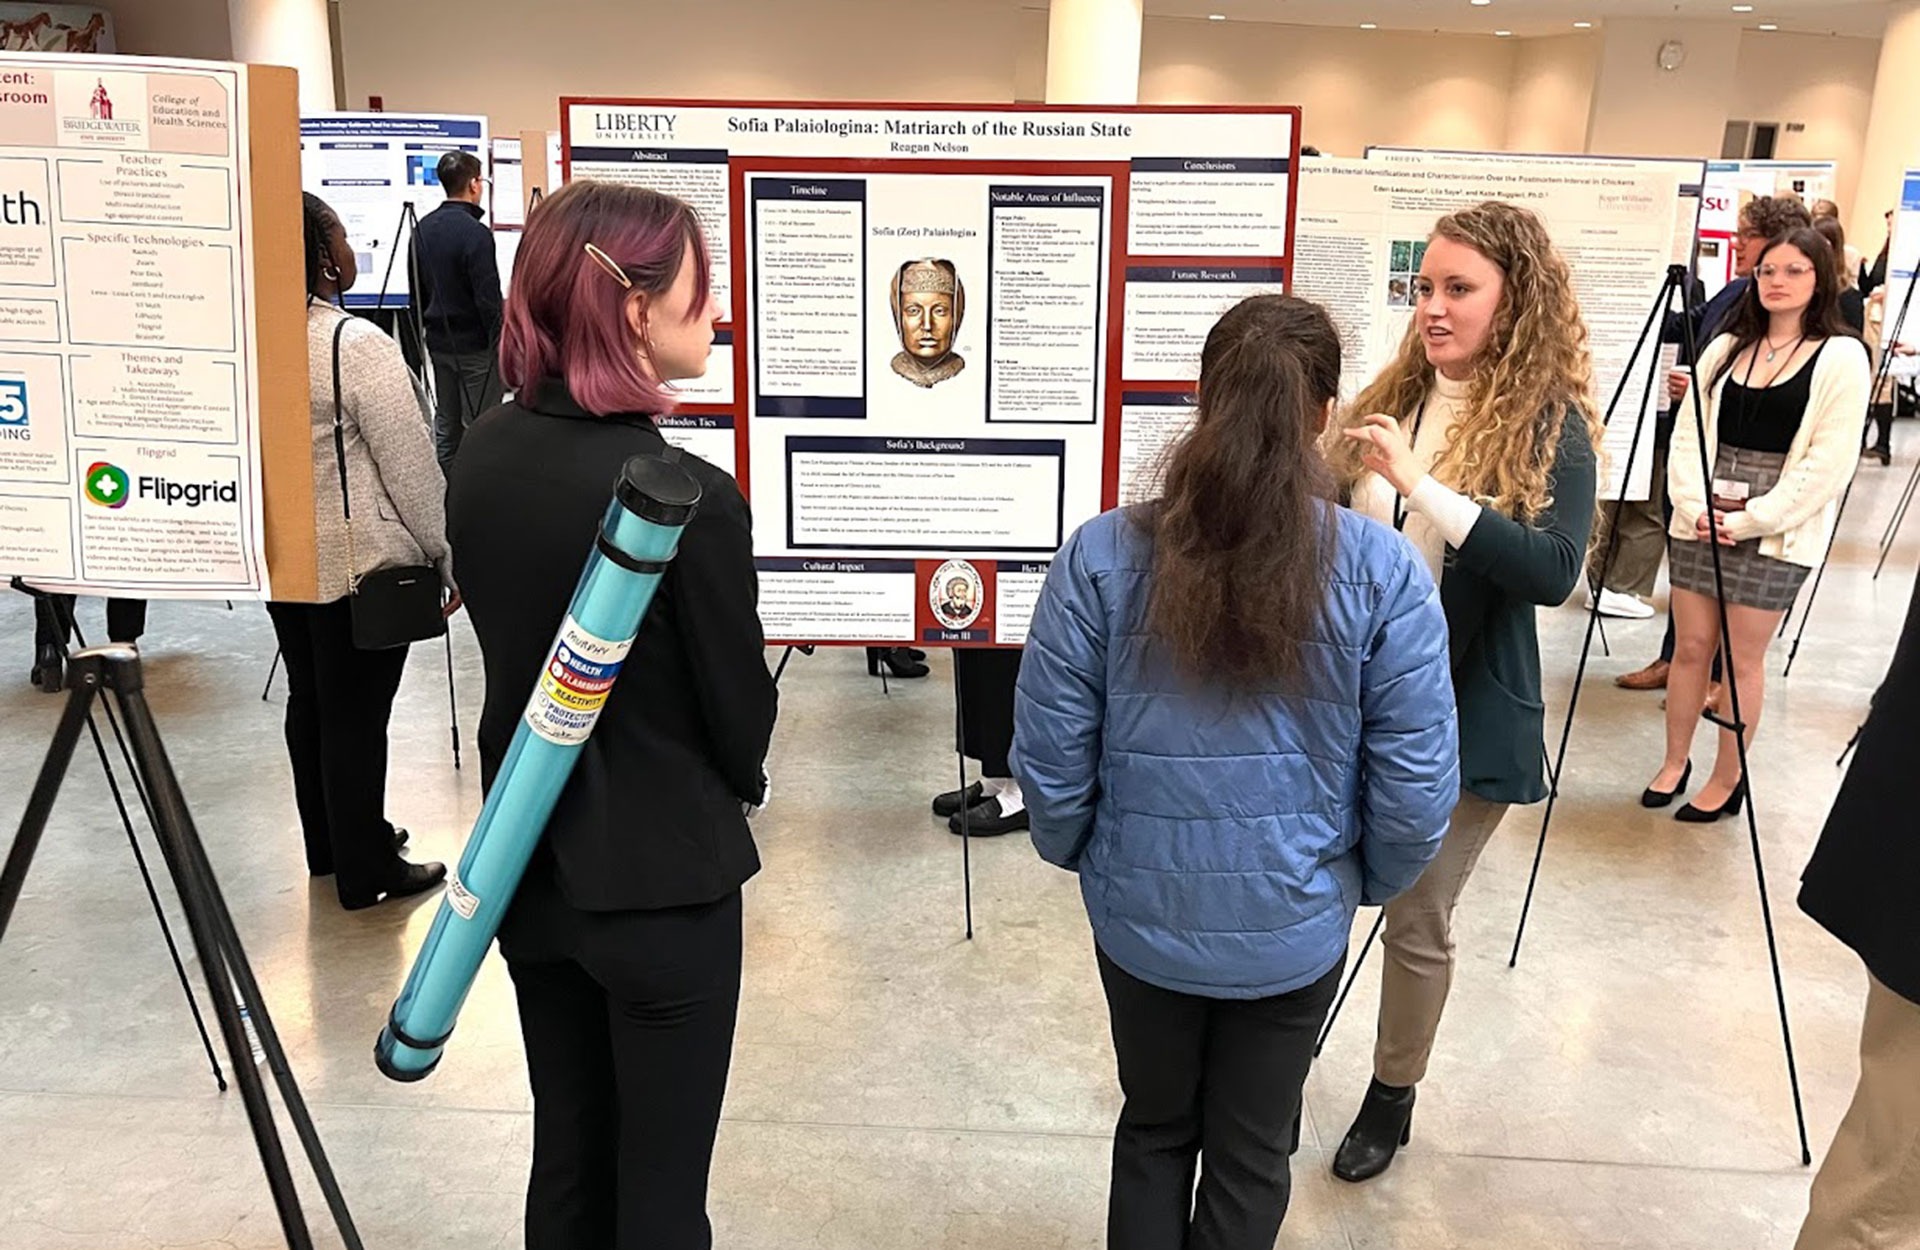 Students present research projects at Harvard University conference